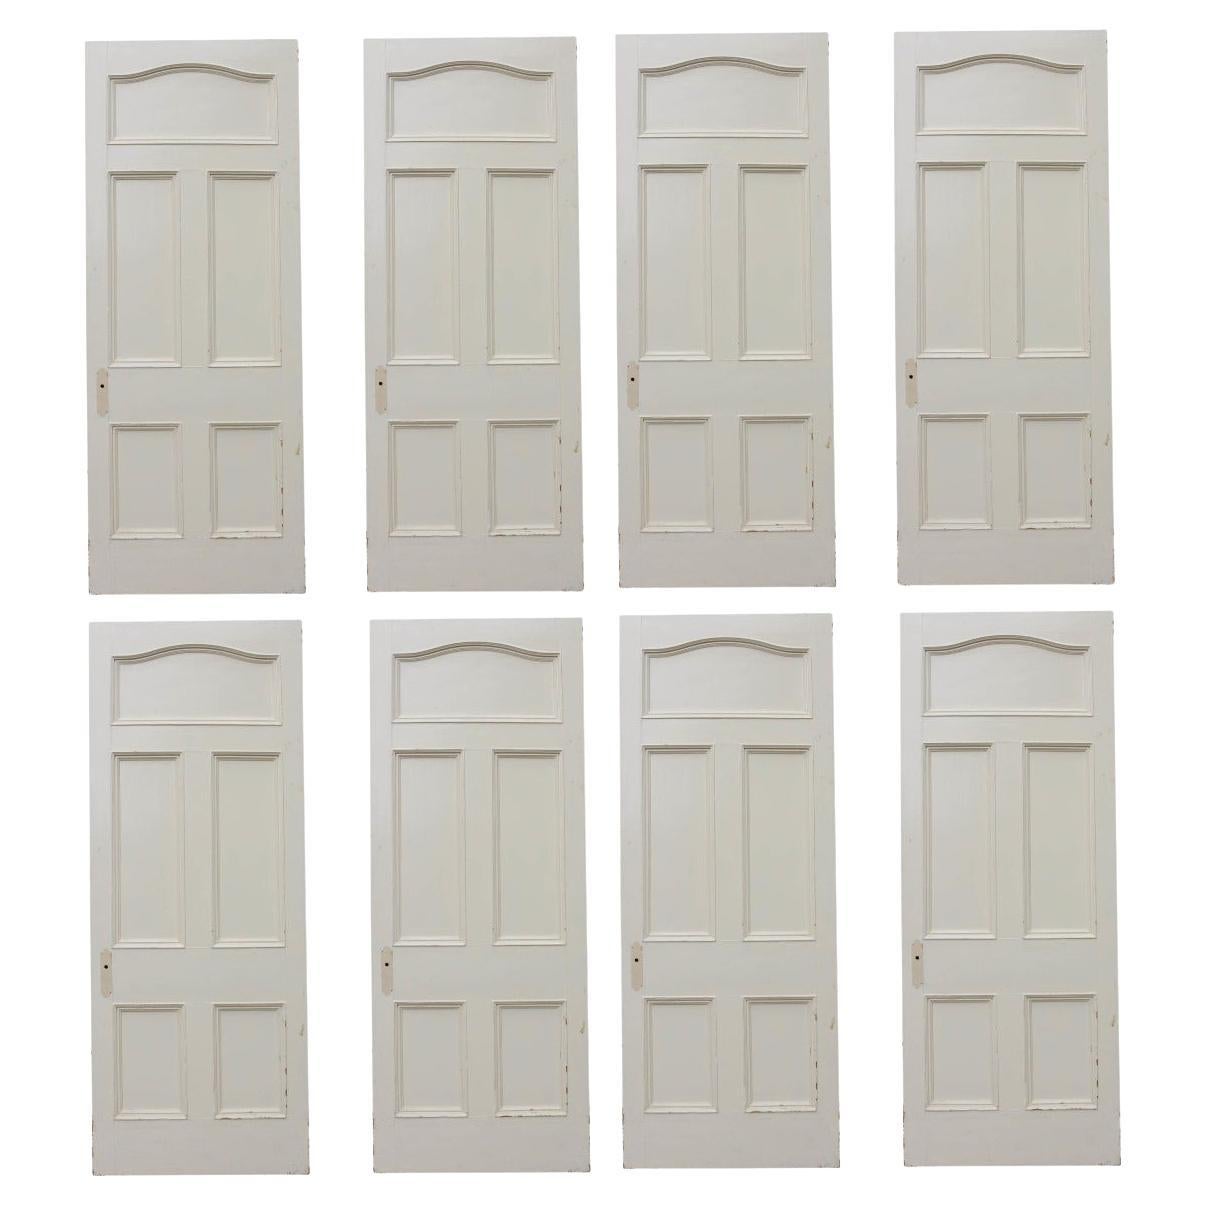 Set of Antique Painted Pine Doors '96 Available'